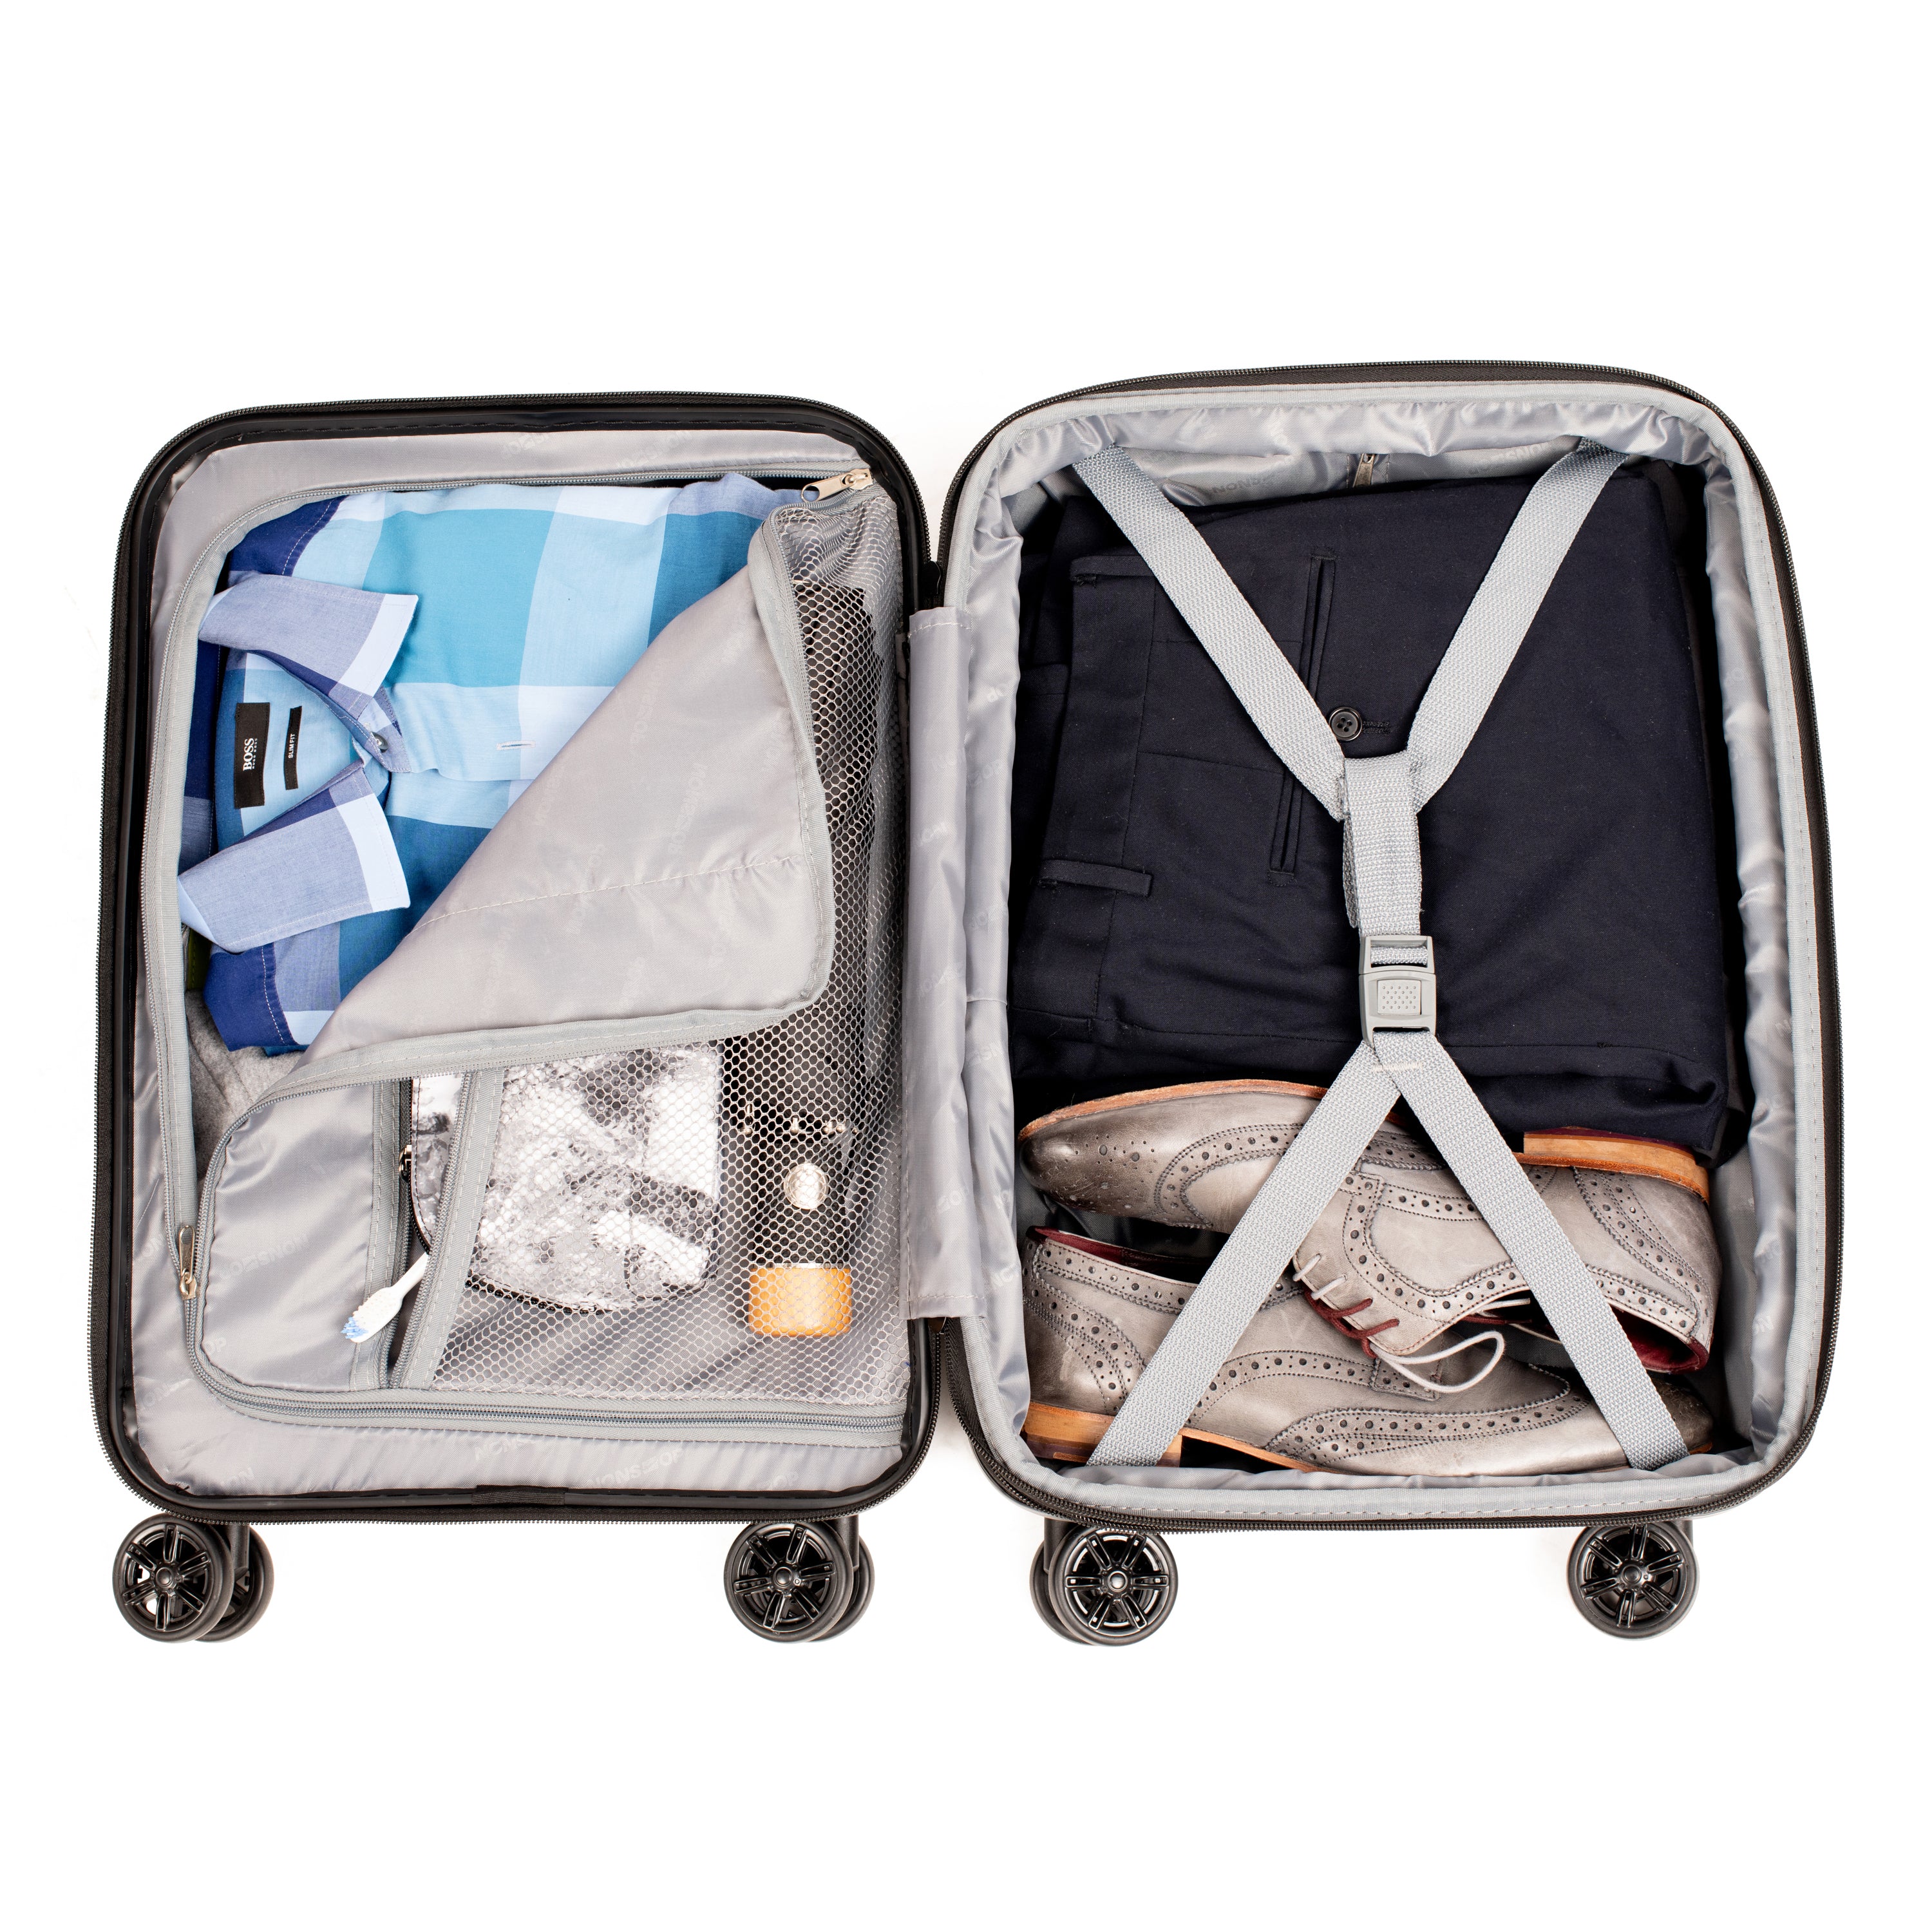 NONSTOP To New York 28-Inch Expandable Spinner with TSA Lock